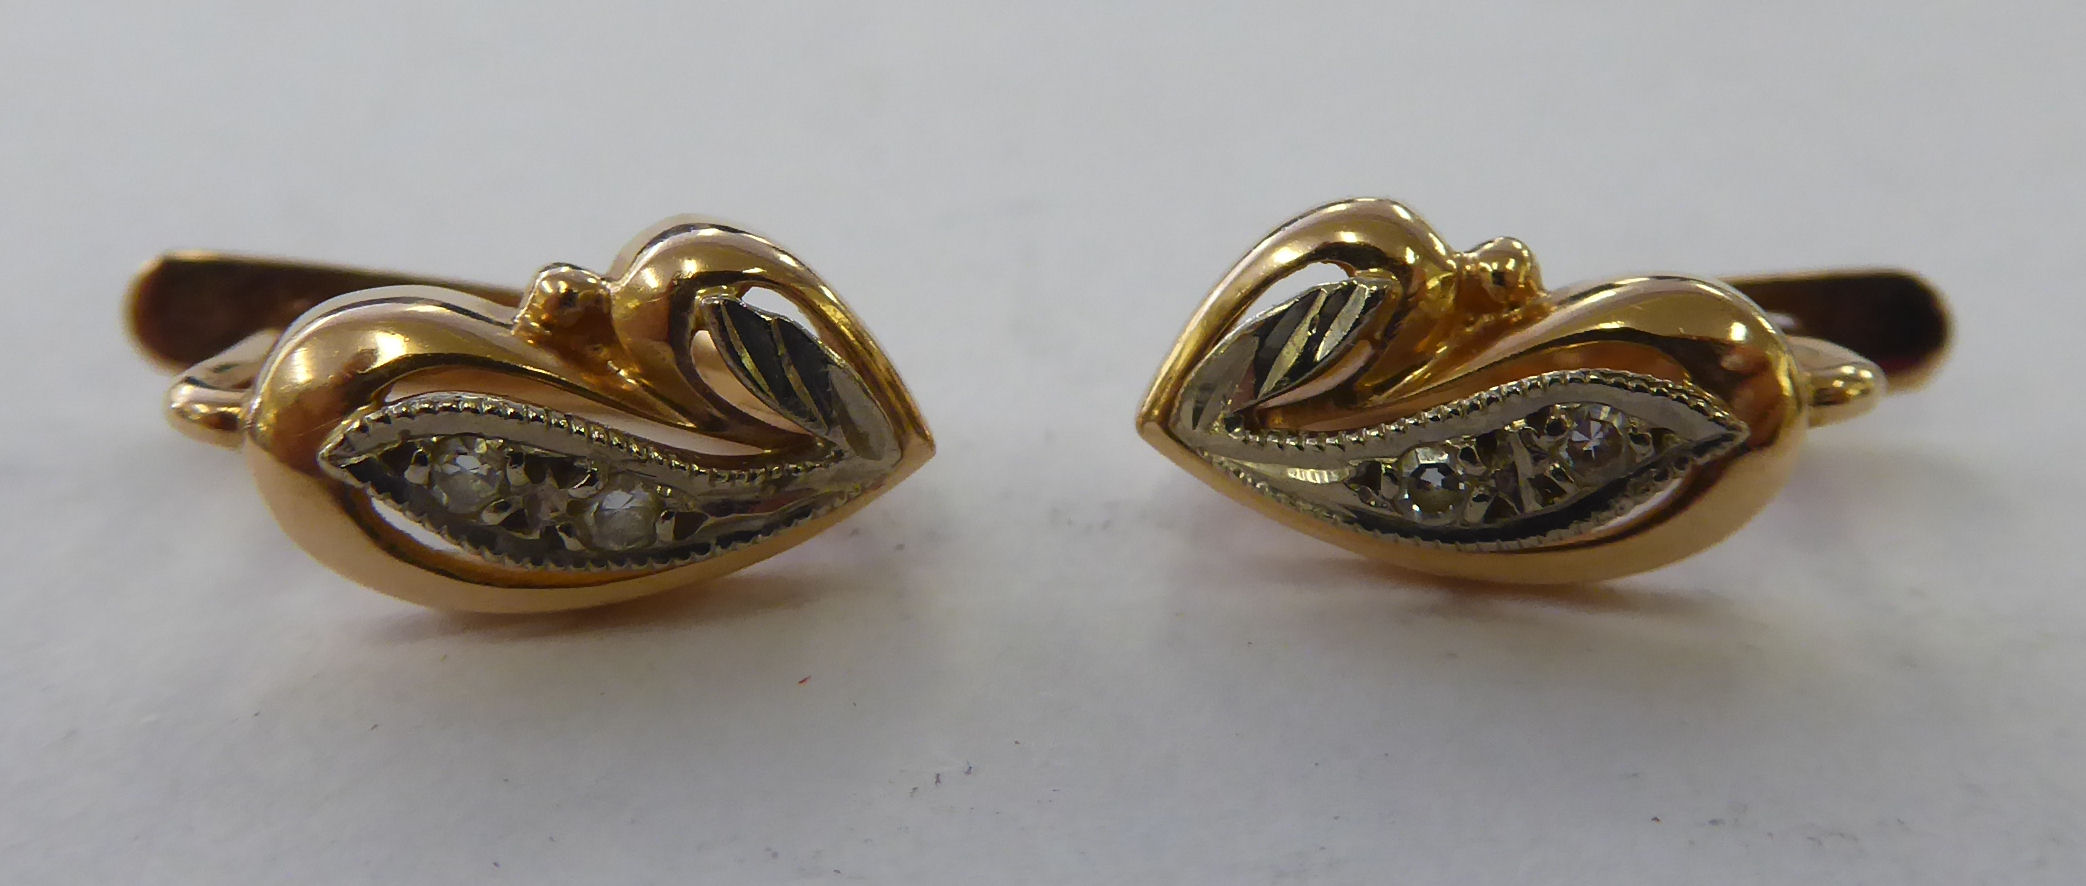 A pair of gold earrings,